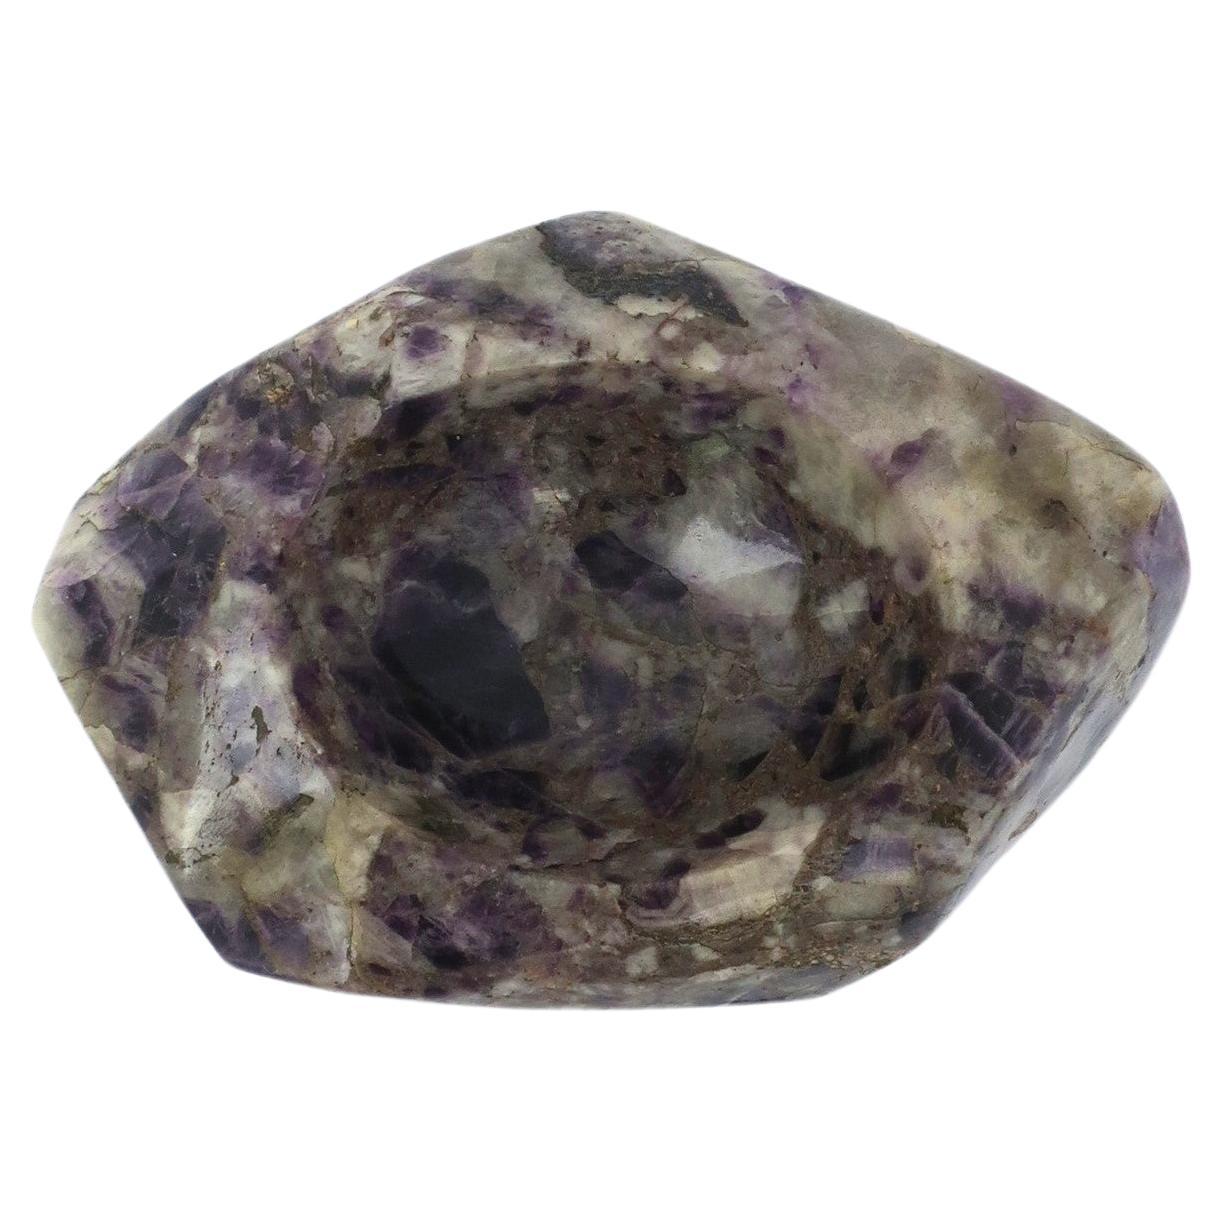 Amythyst Purple and White Stone Jewelry Dish Vide-Poche For Sale